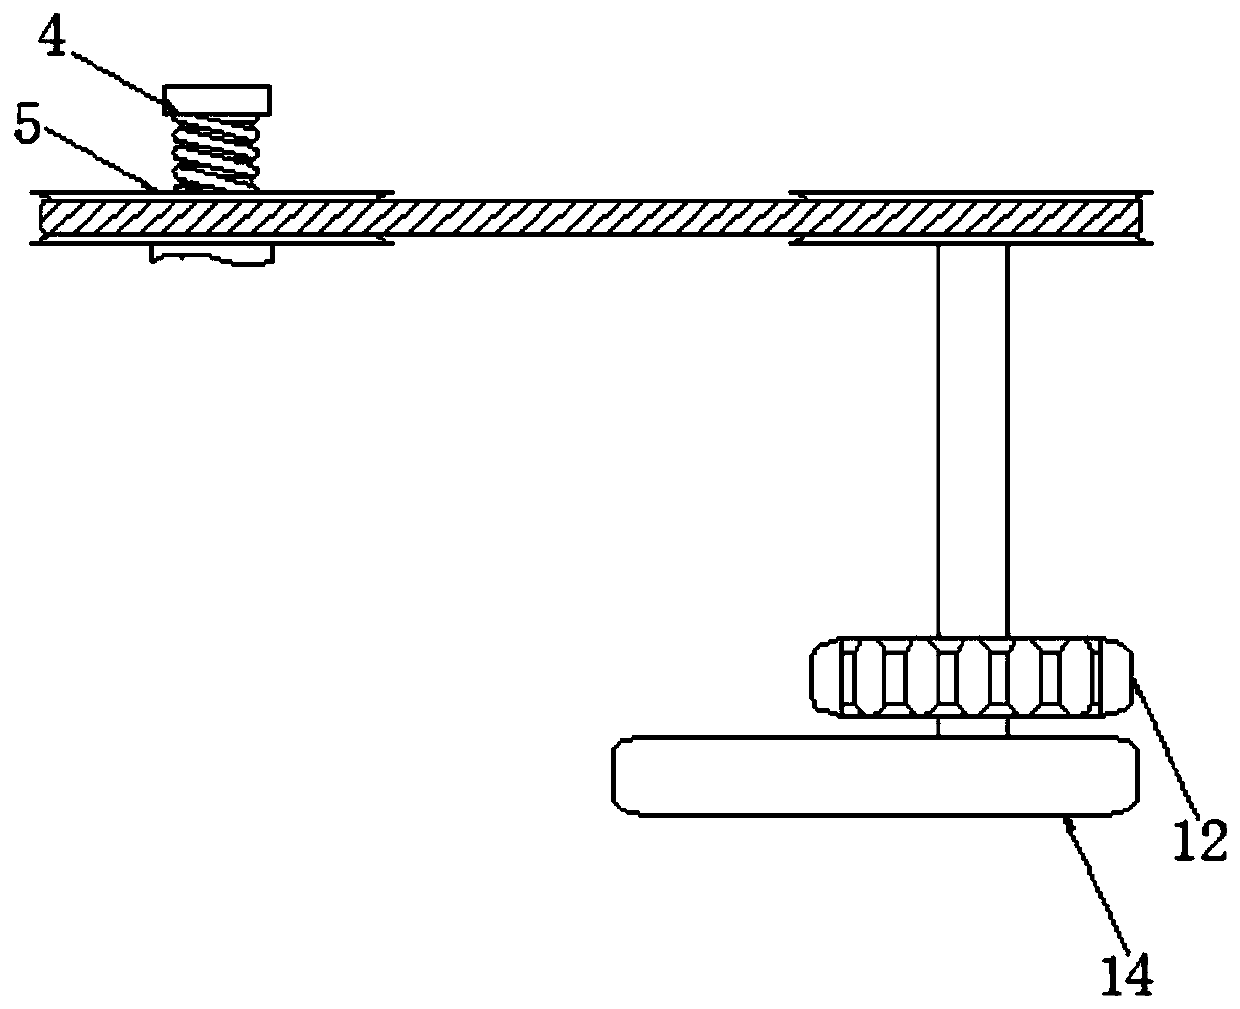 Straw discharging equipment capable of performing intermittent discharging and speed-change pushing, for electricity generation with agricultural garbage